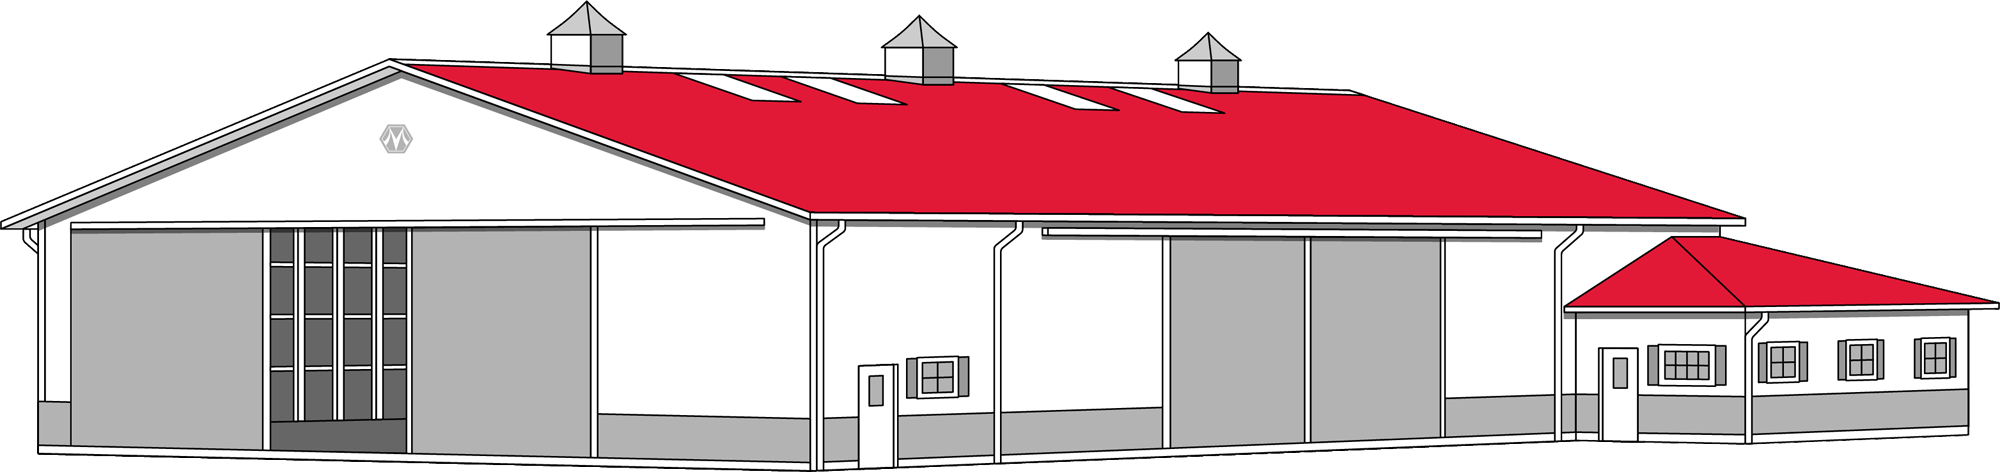 farmhouse clipart straw roof